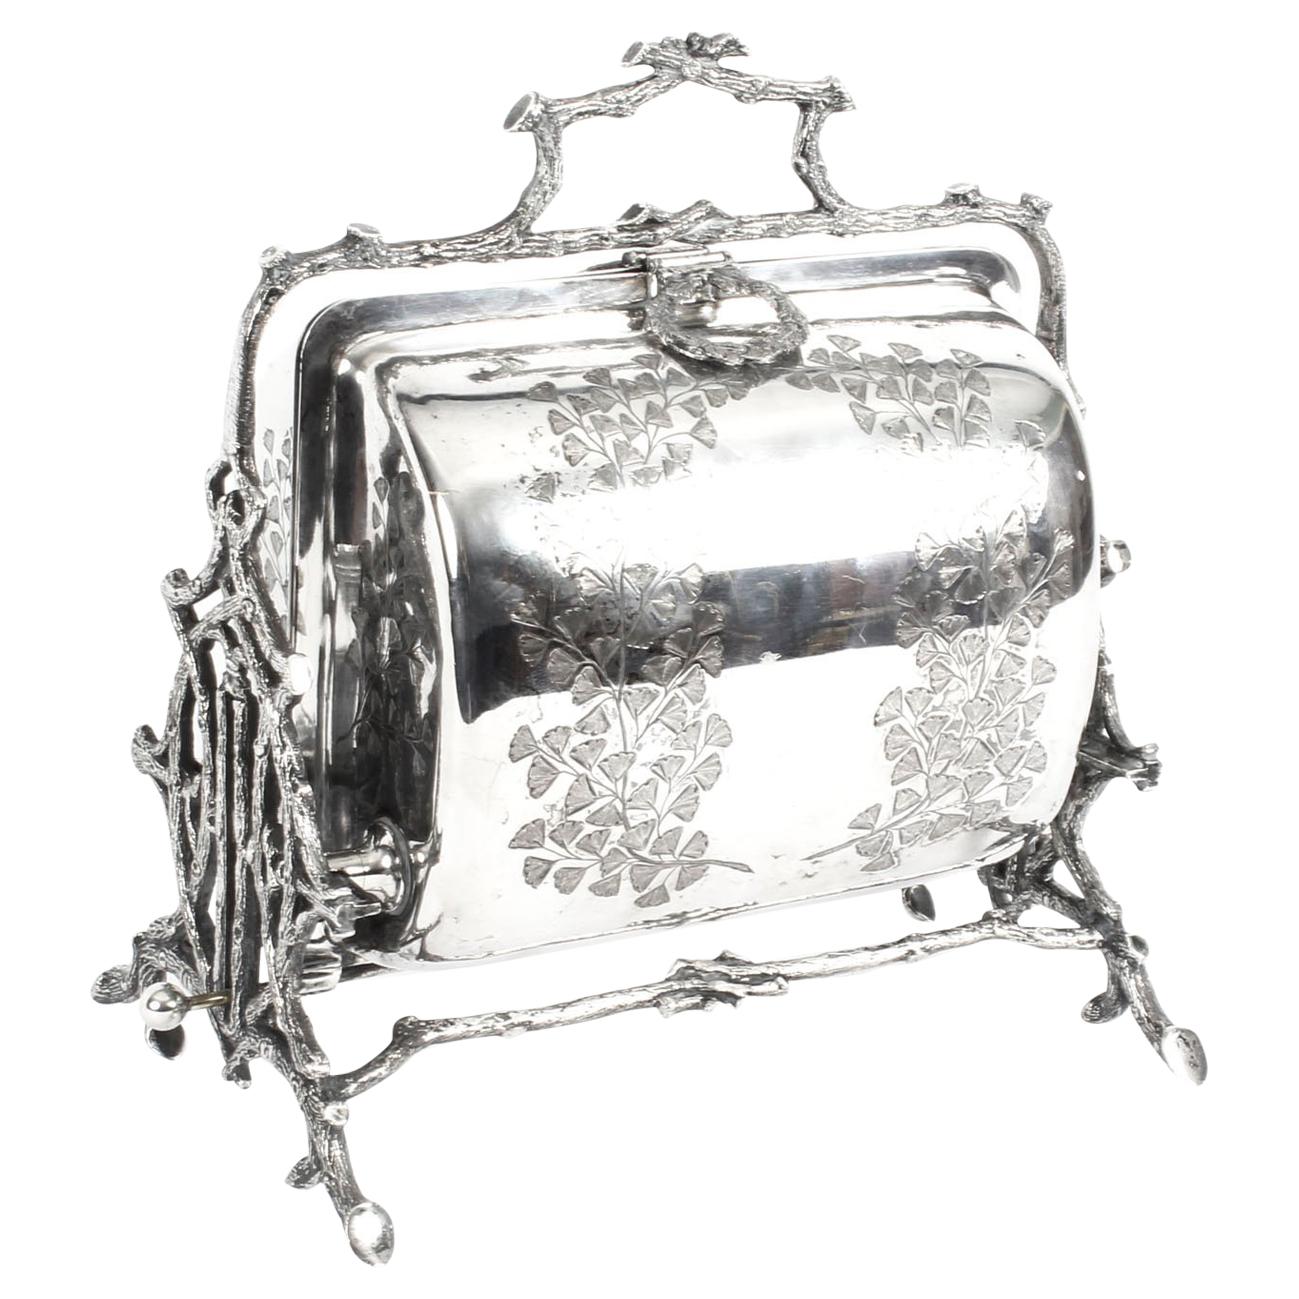 Antique English Silver Plated Folding Sweets Biscuit Box, 19th Century